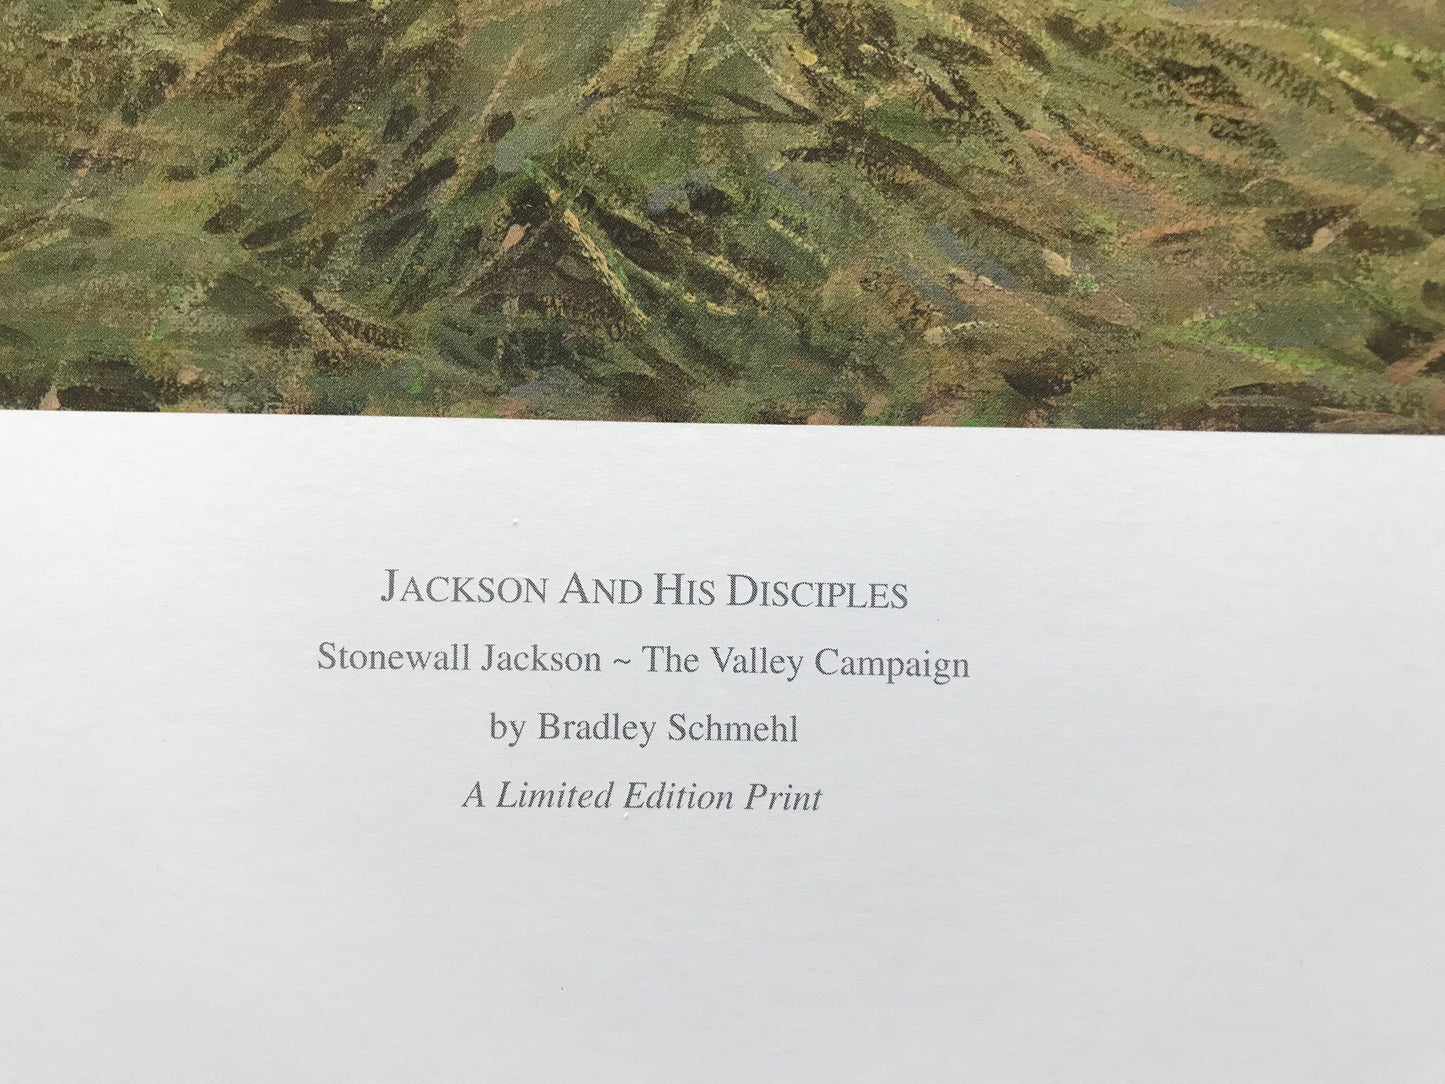 JACKSON AND HIS DISCIPLES Limited Edition Civil War Print by Bradley Schmehl